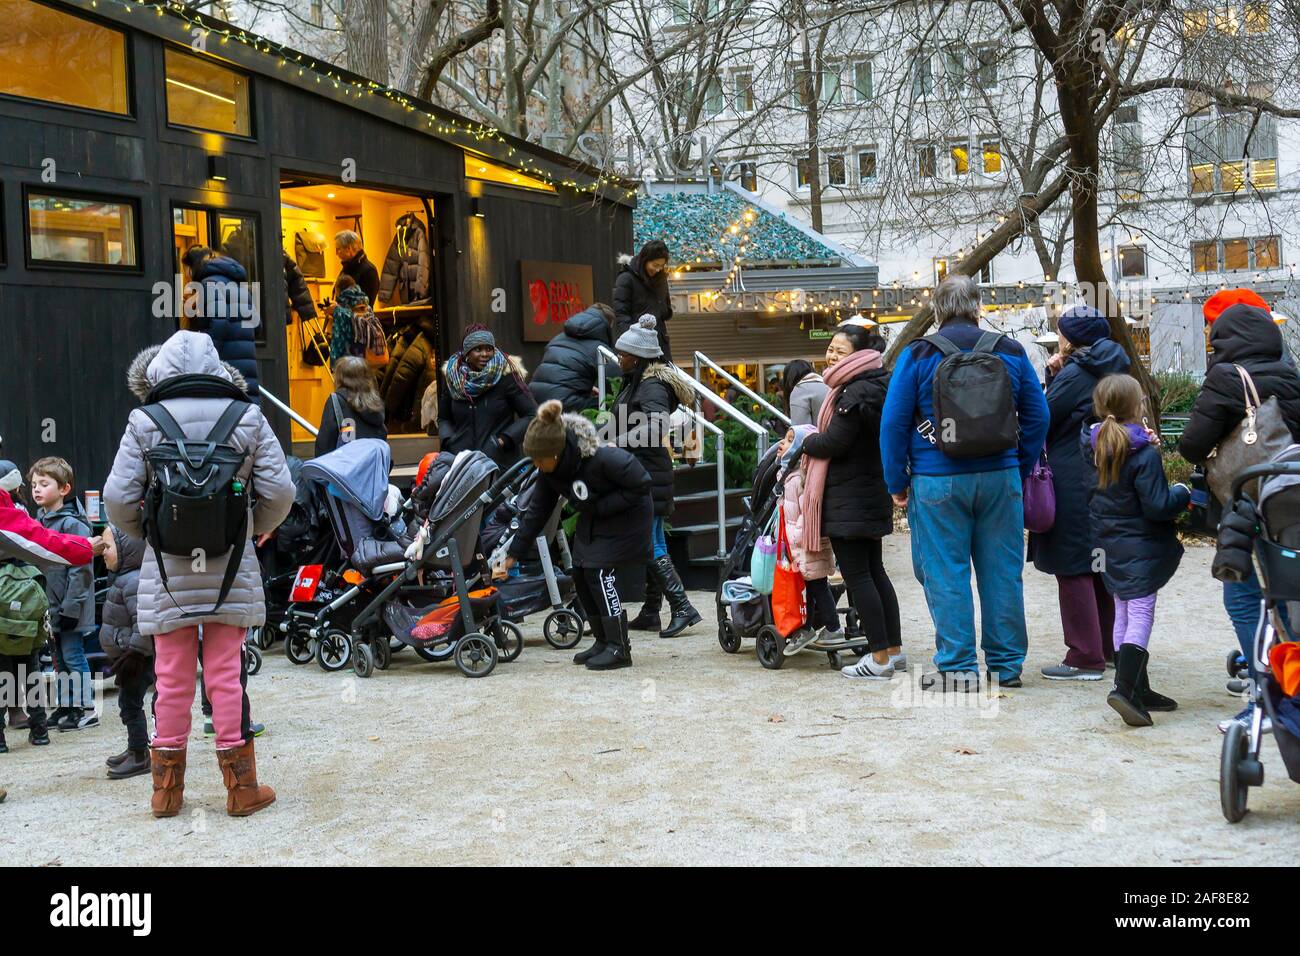 Visitors to the Madison Square Park tree lighting in New York on Thursday, December 5, 2019 enjoy the hospitality of hot chocolate from Fjällräven in their tiny house branding event. The outdoor equipment manufacturer sponsored the tree lighting and is owned by Fenix Outdoor which owns other brands including Royal Robbins. (© Richard B. Levine) Stock Photo